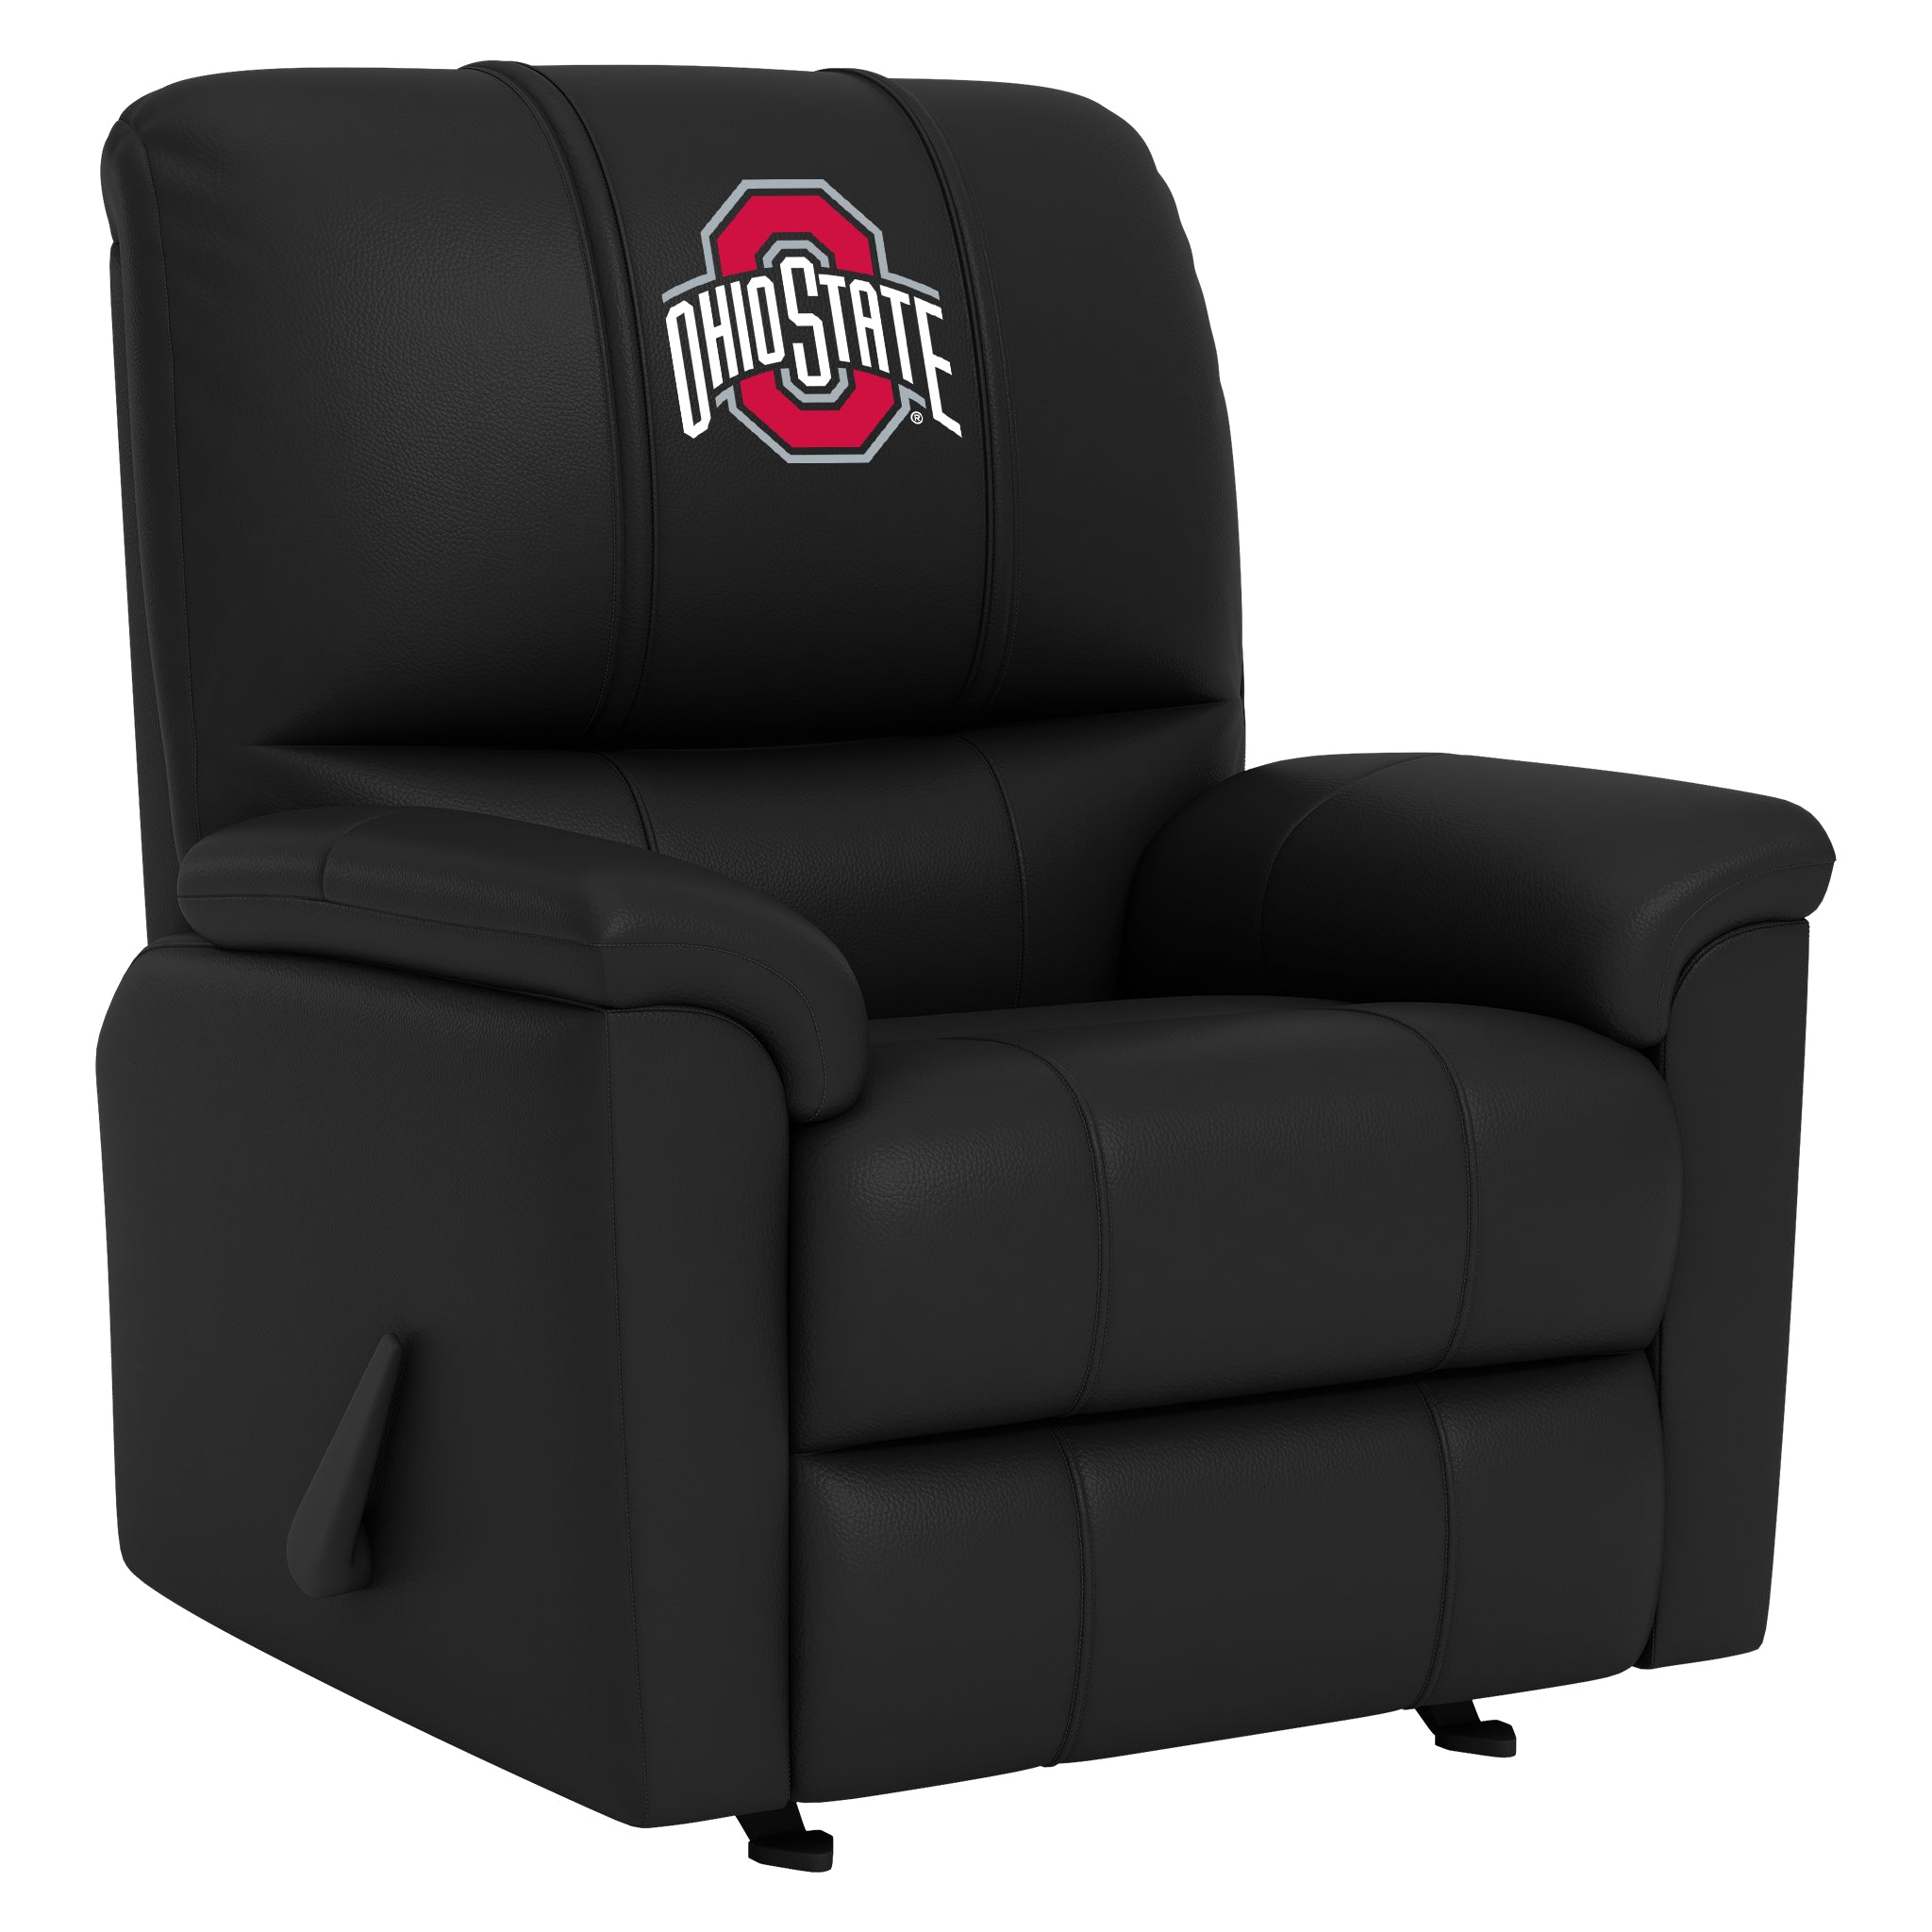 Ohio State Silver Club Chair with Ohio State Primary Logo